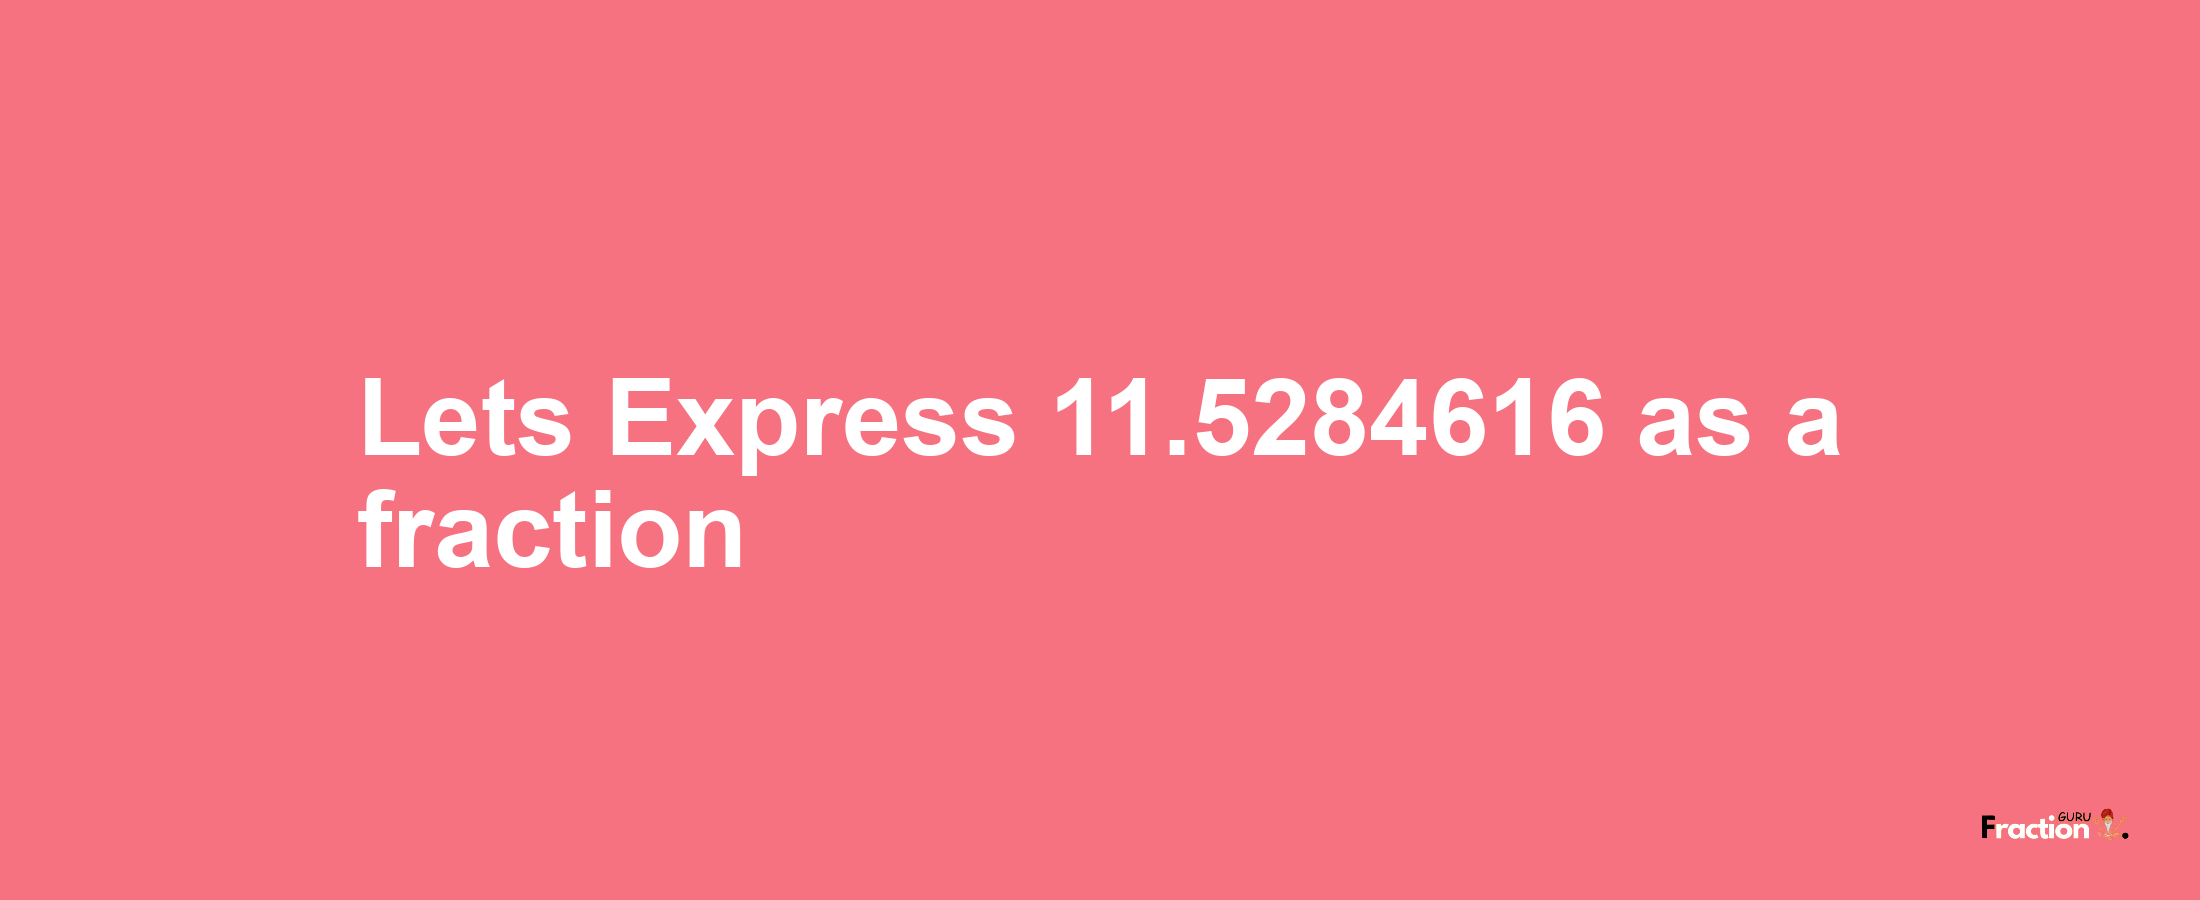 Lets Express 11.5284616 as afraction